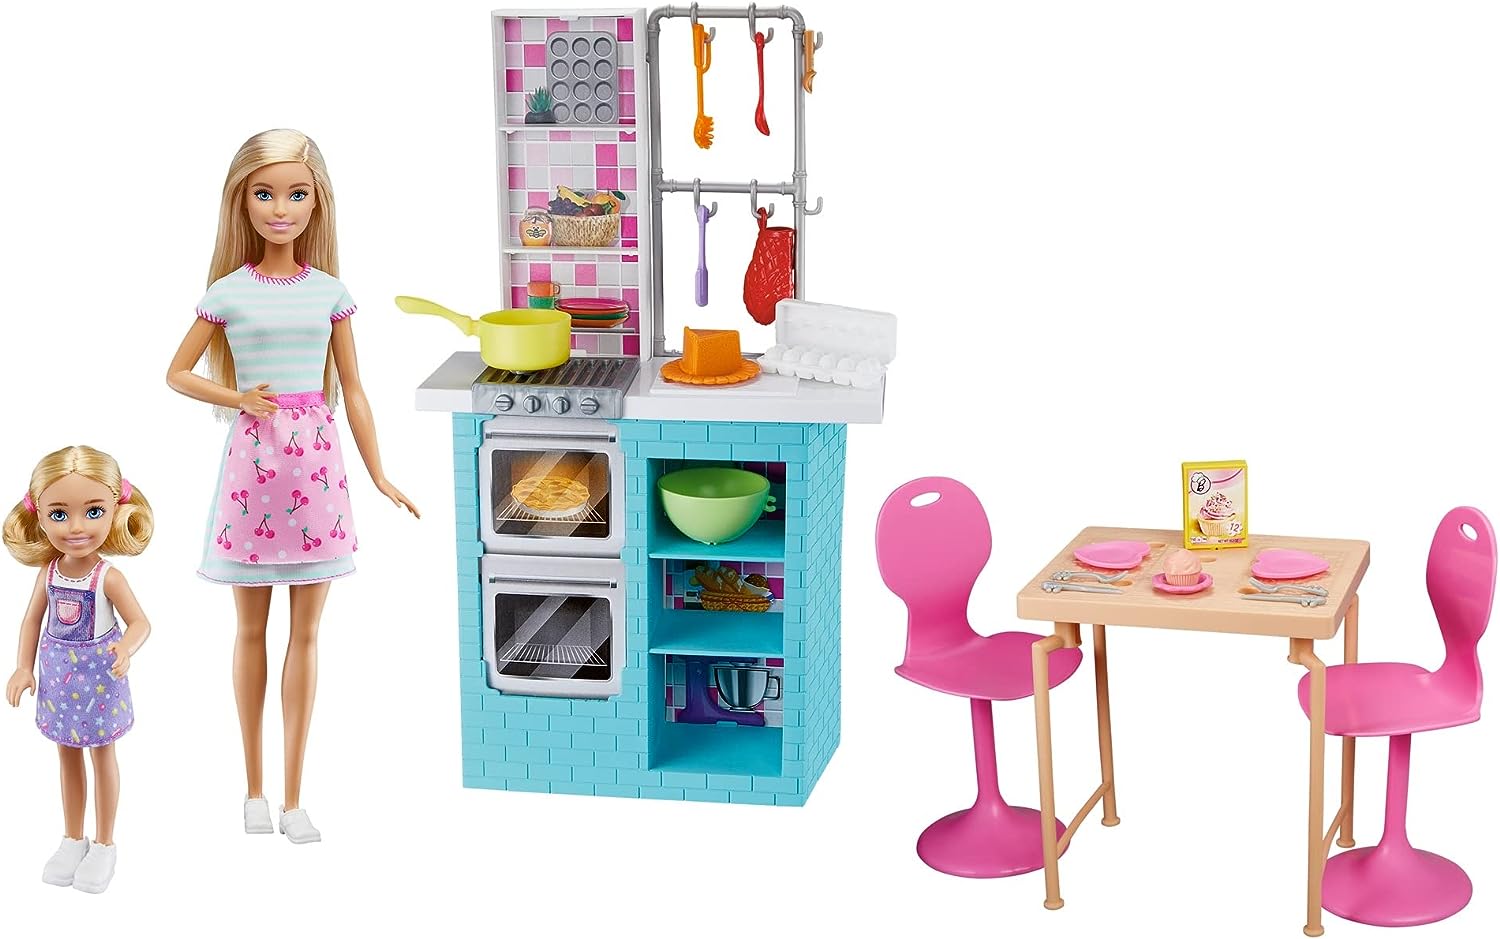 Barbie Doll, Pets and Playset, 3+